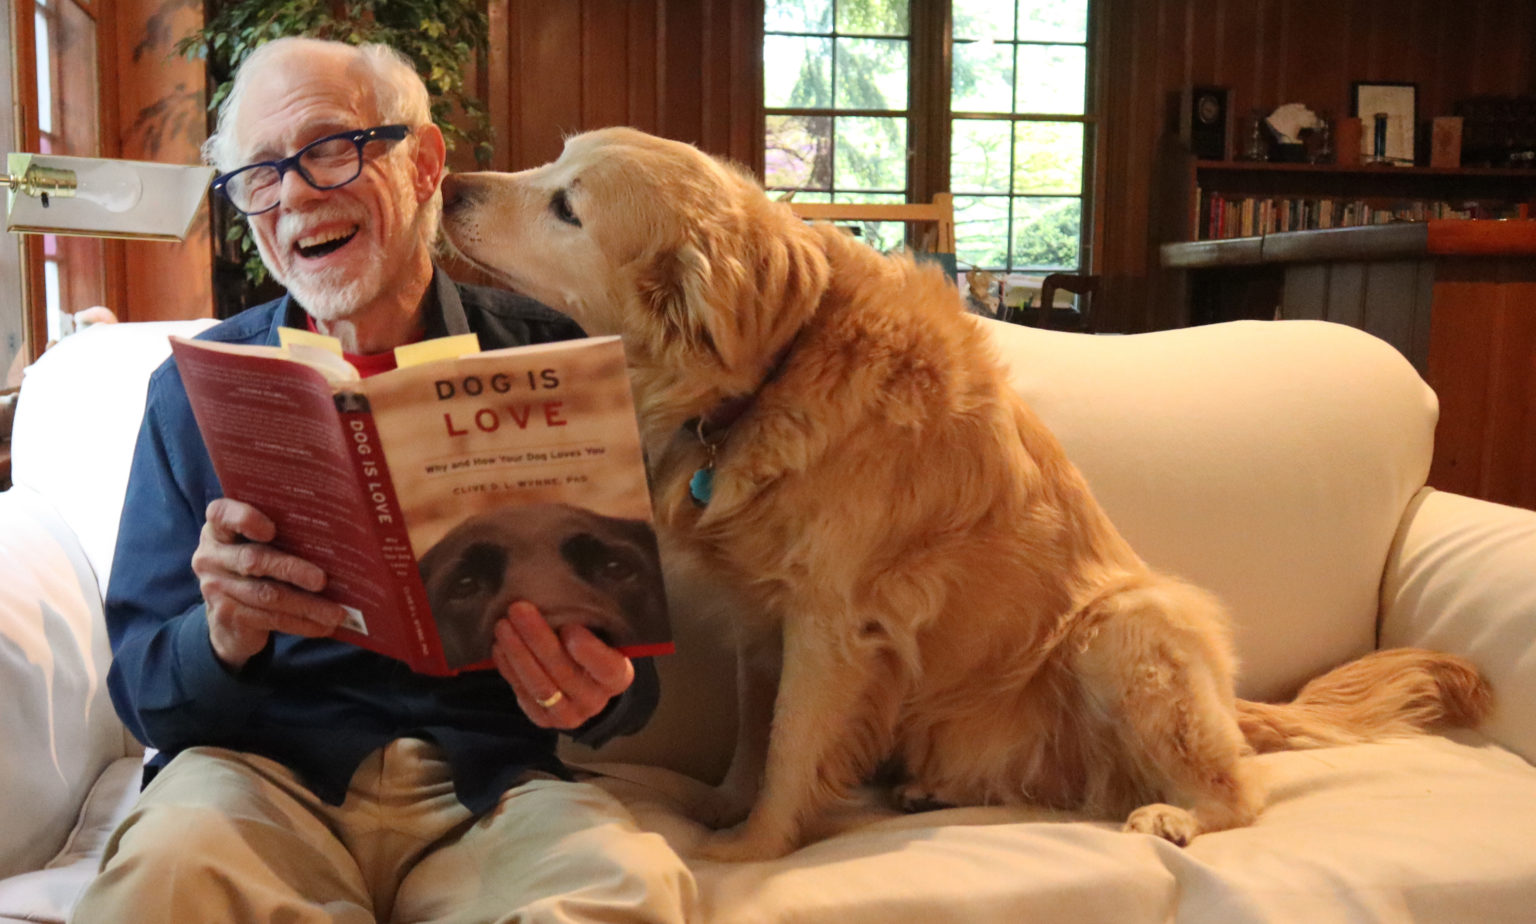 Buddy and Millie reading "DOG IS LOVE " book on the couch